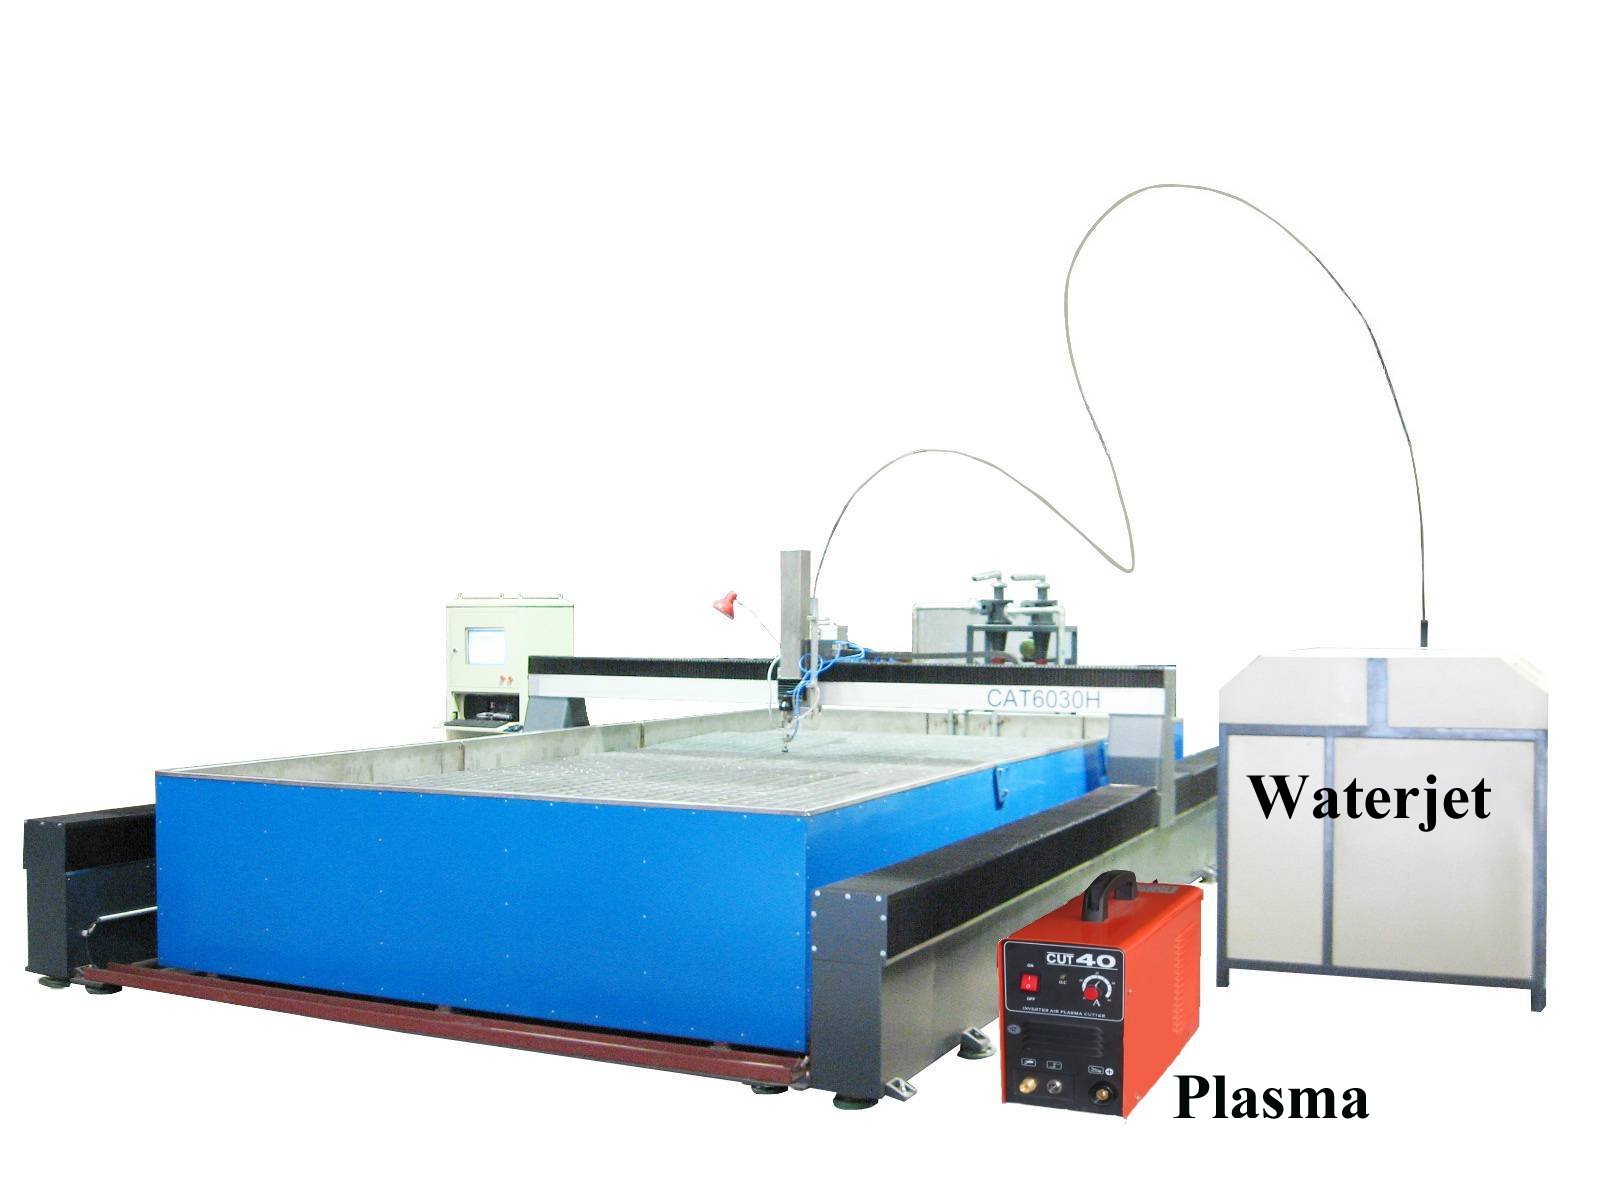 waterjet and plasma together